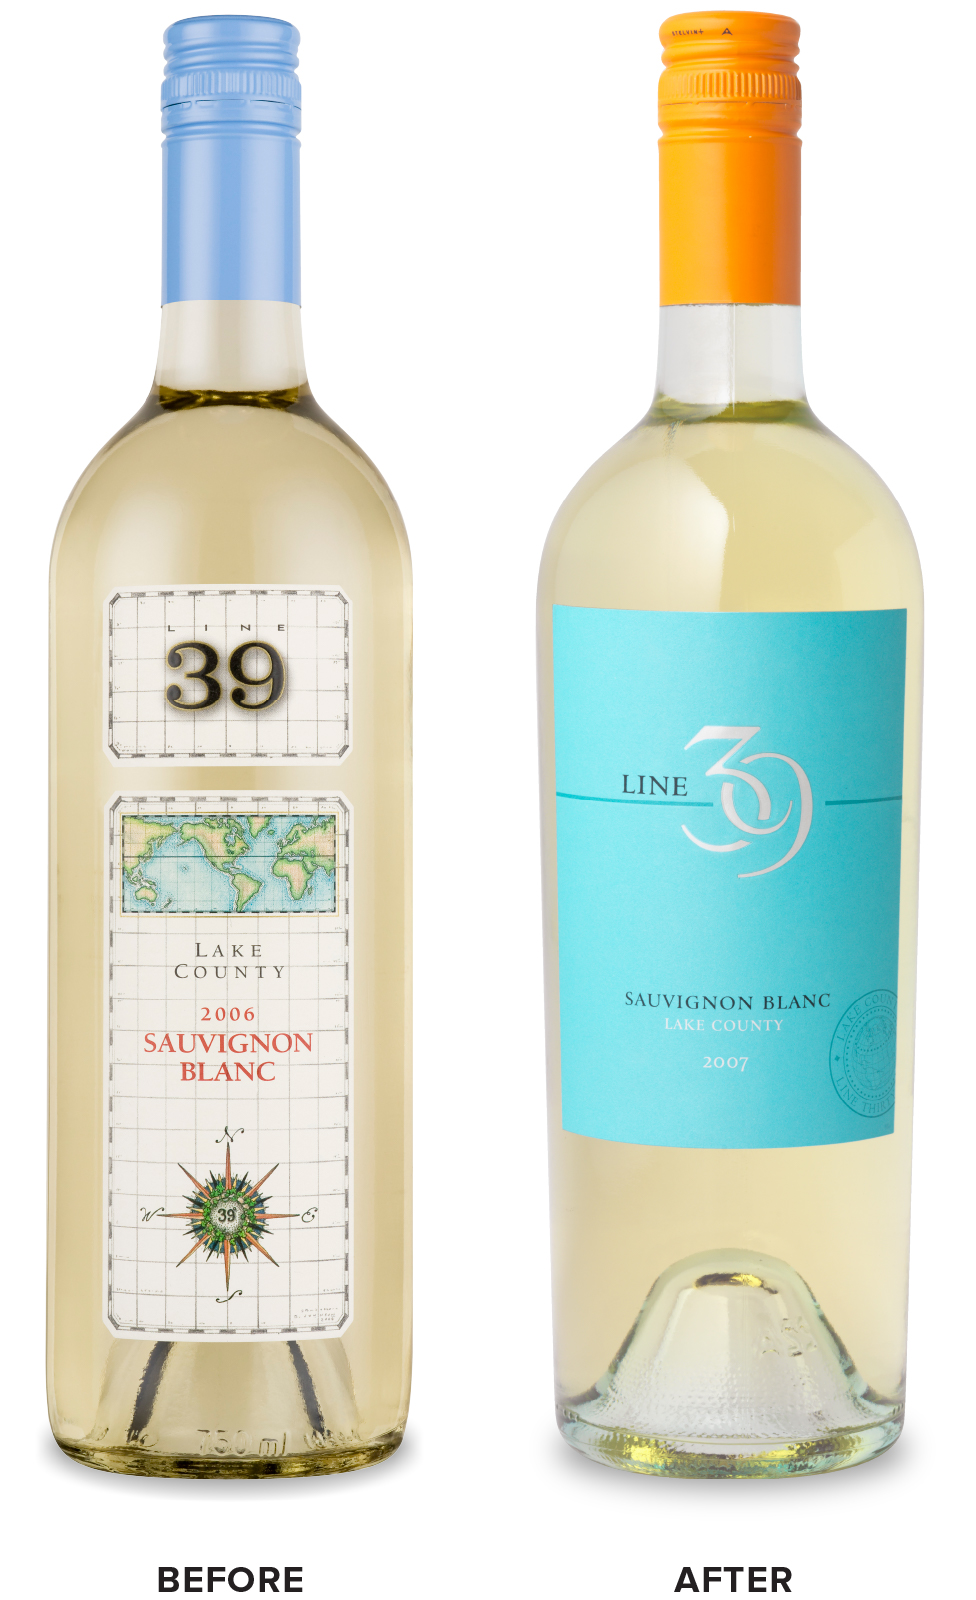 Line 39 Wine Packaging Before Redesign on Left & After on Right